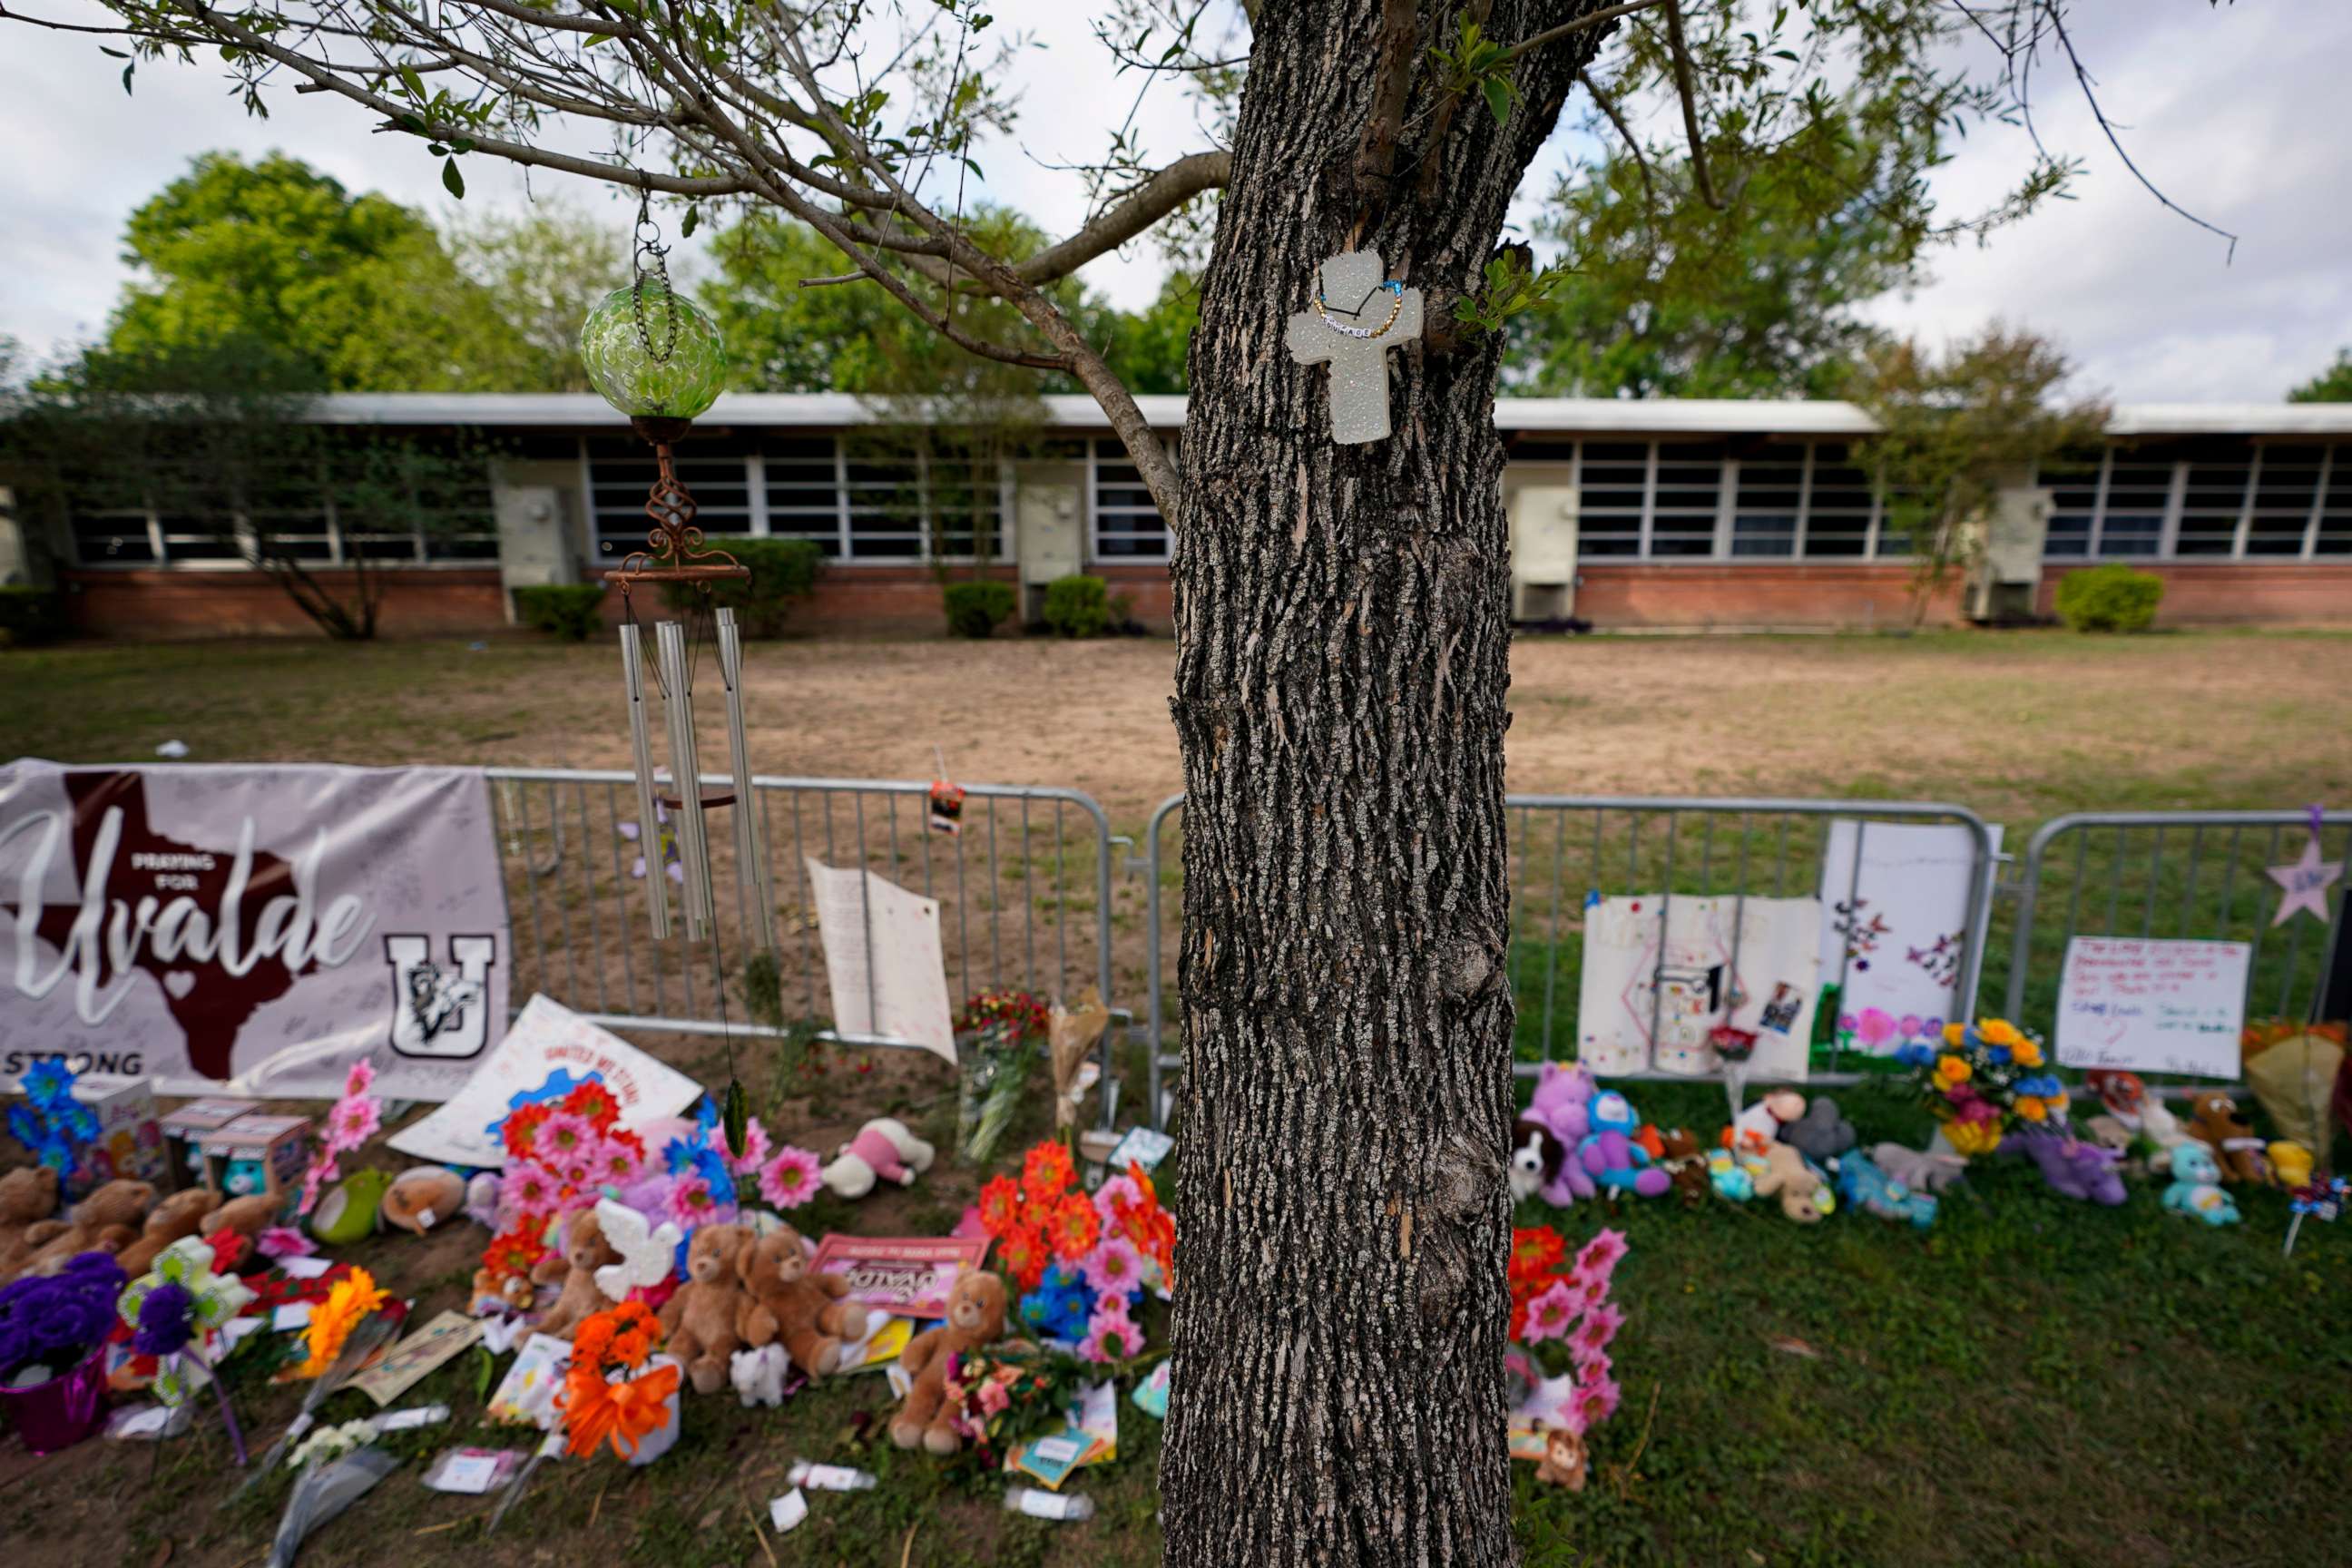 PHOTO: A cross hangs on a tree at Robb Elementary School where a memorial has been created to honor the victims killed in the recent school shooting, June 3, 2022, in Uvalde, Texas.